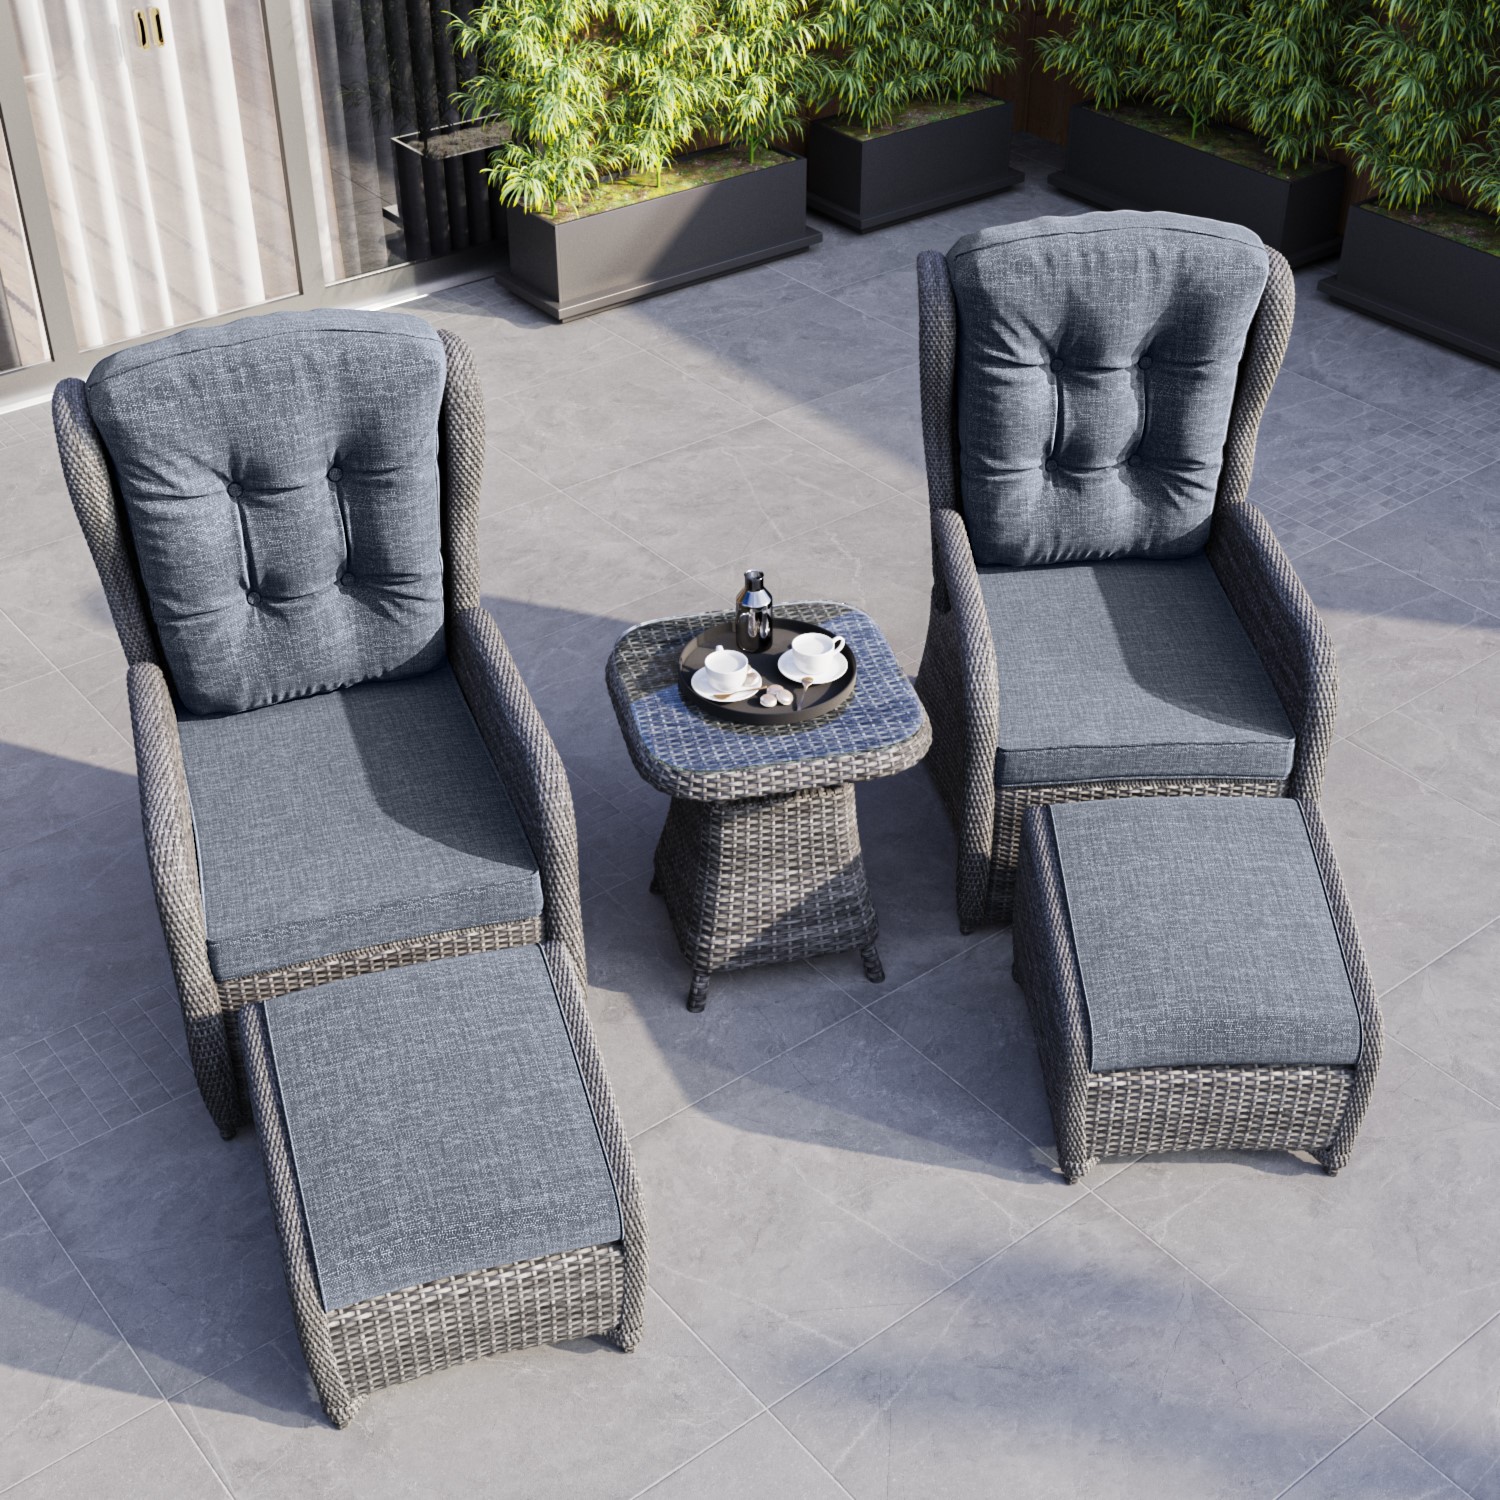 Read more about Reclining rattan garden sun lounger set with table and footstools dark grey aspen